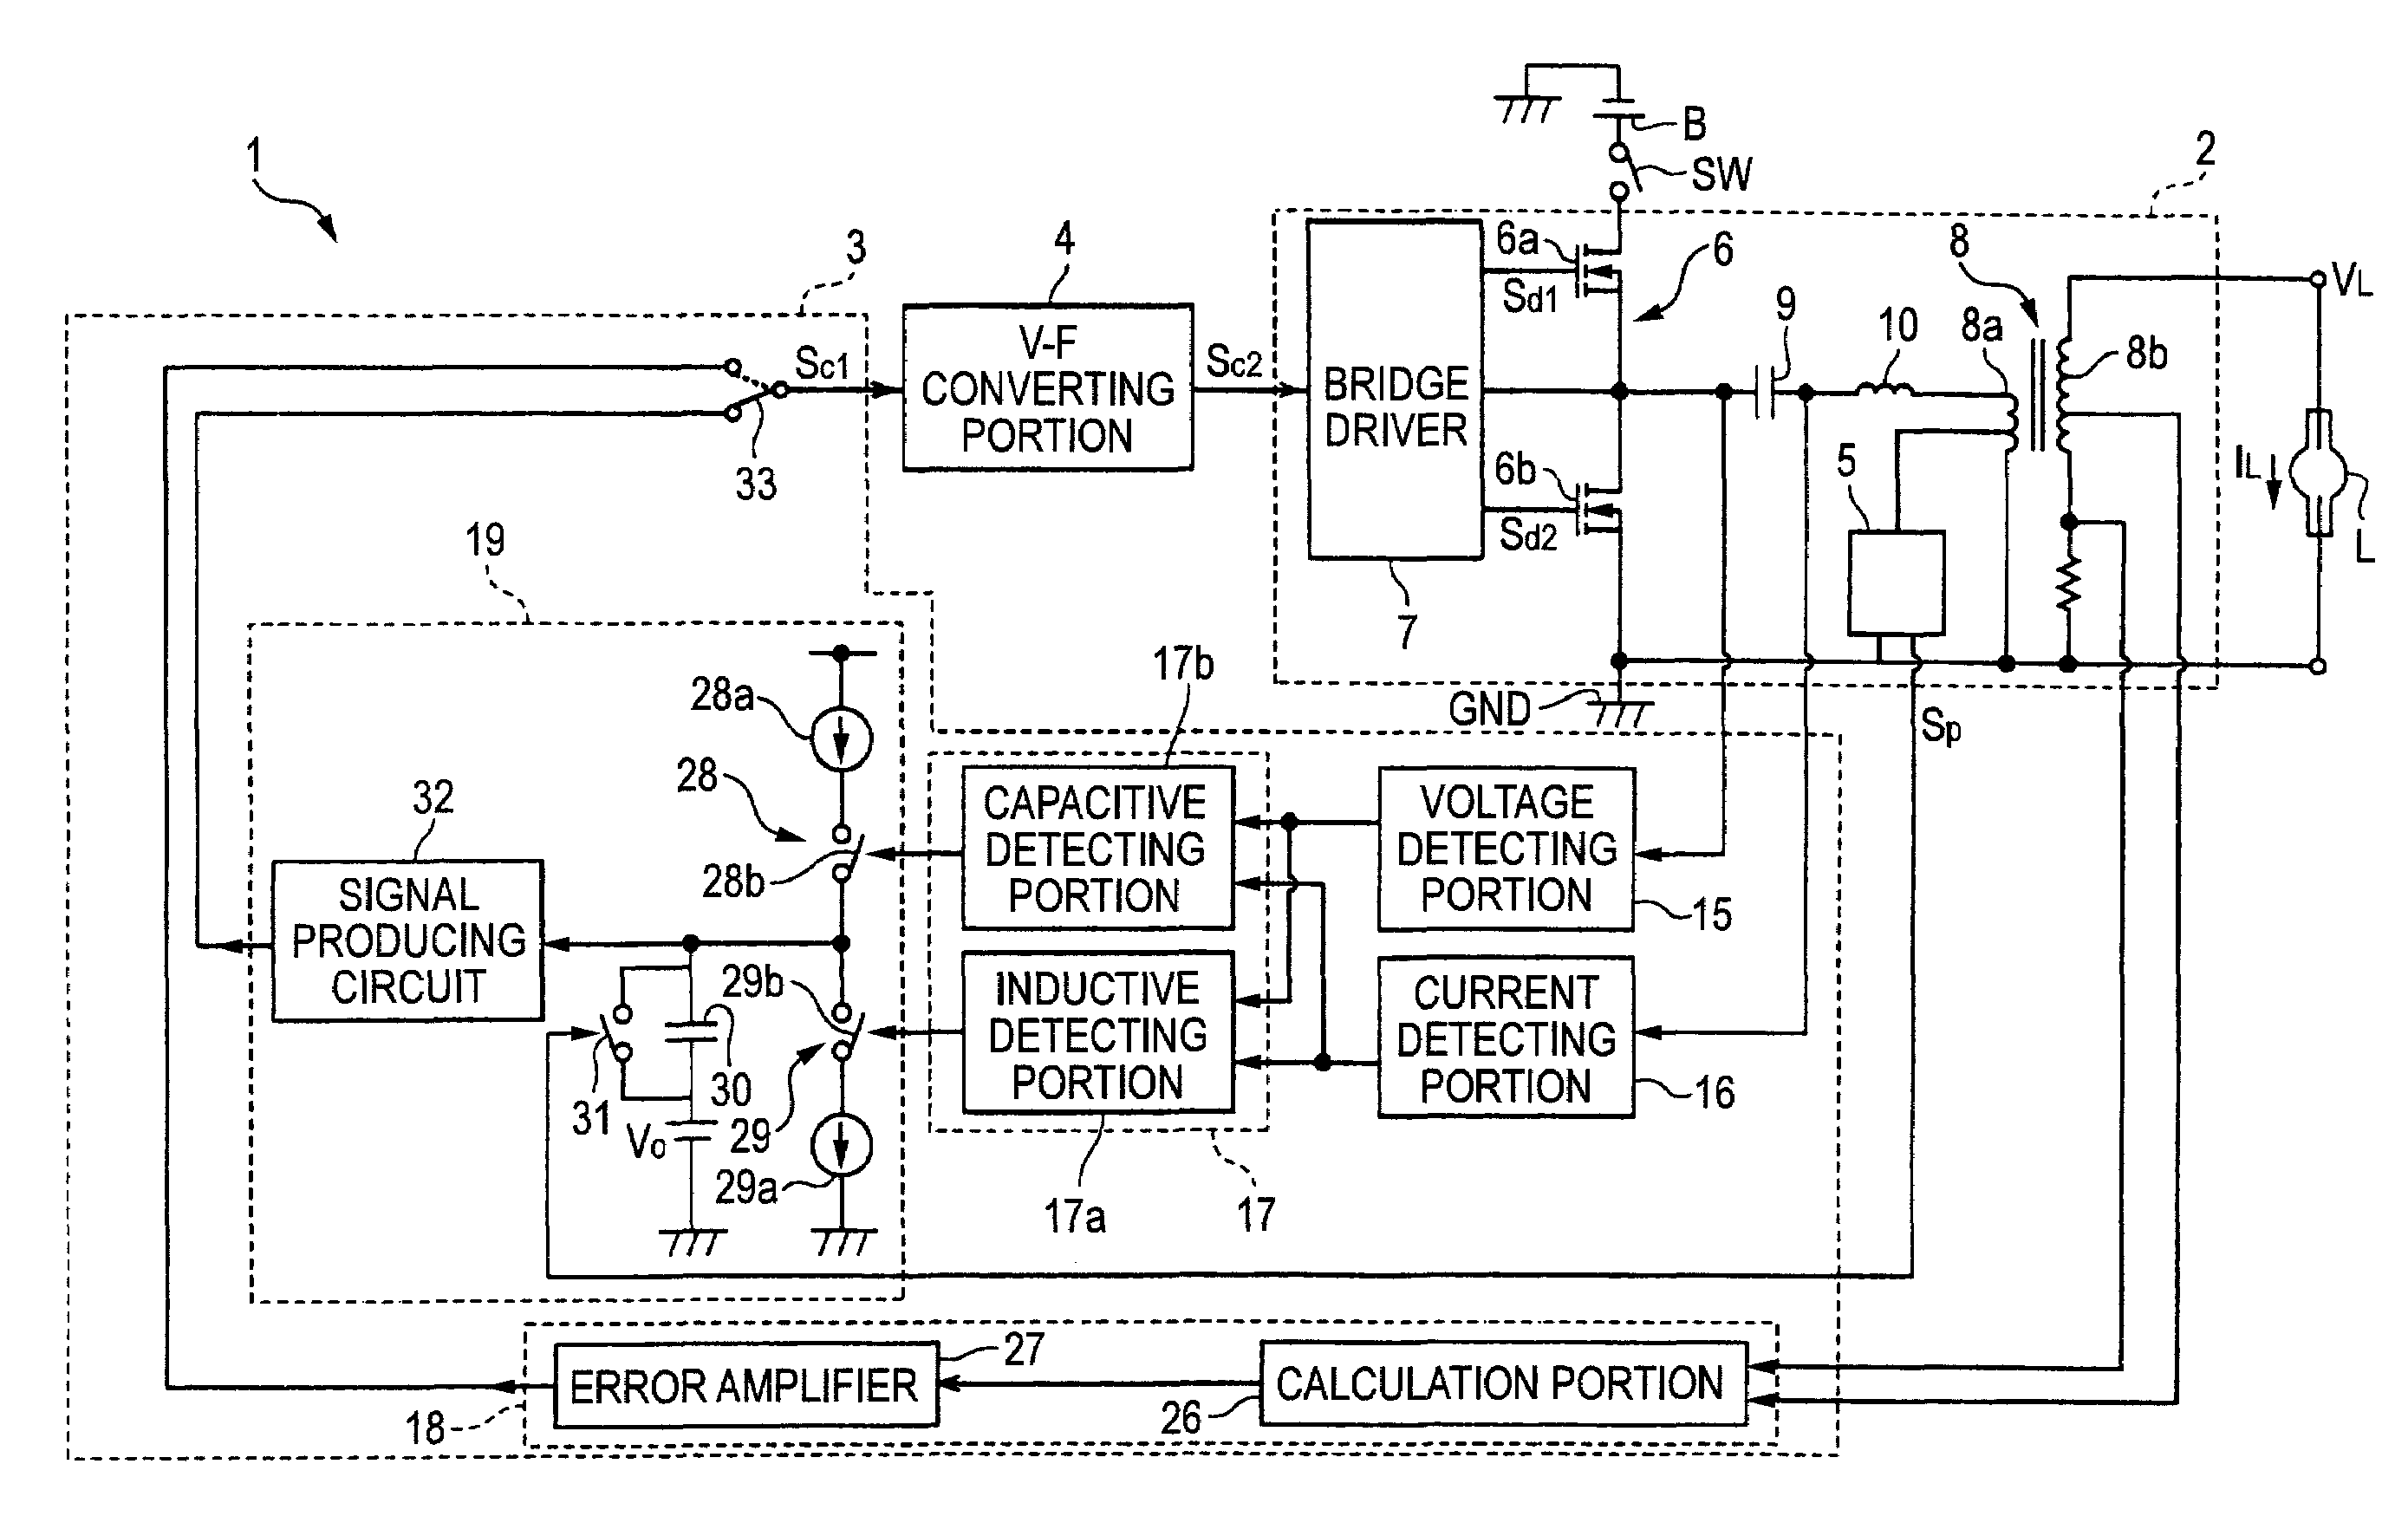 Discharge lamp lighting circuit with frequency control in accordance with phase difference